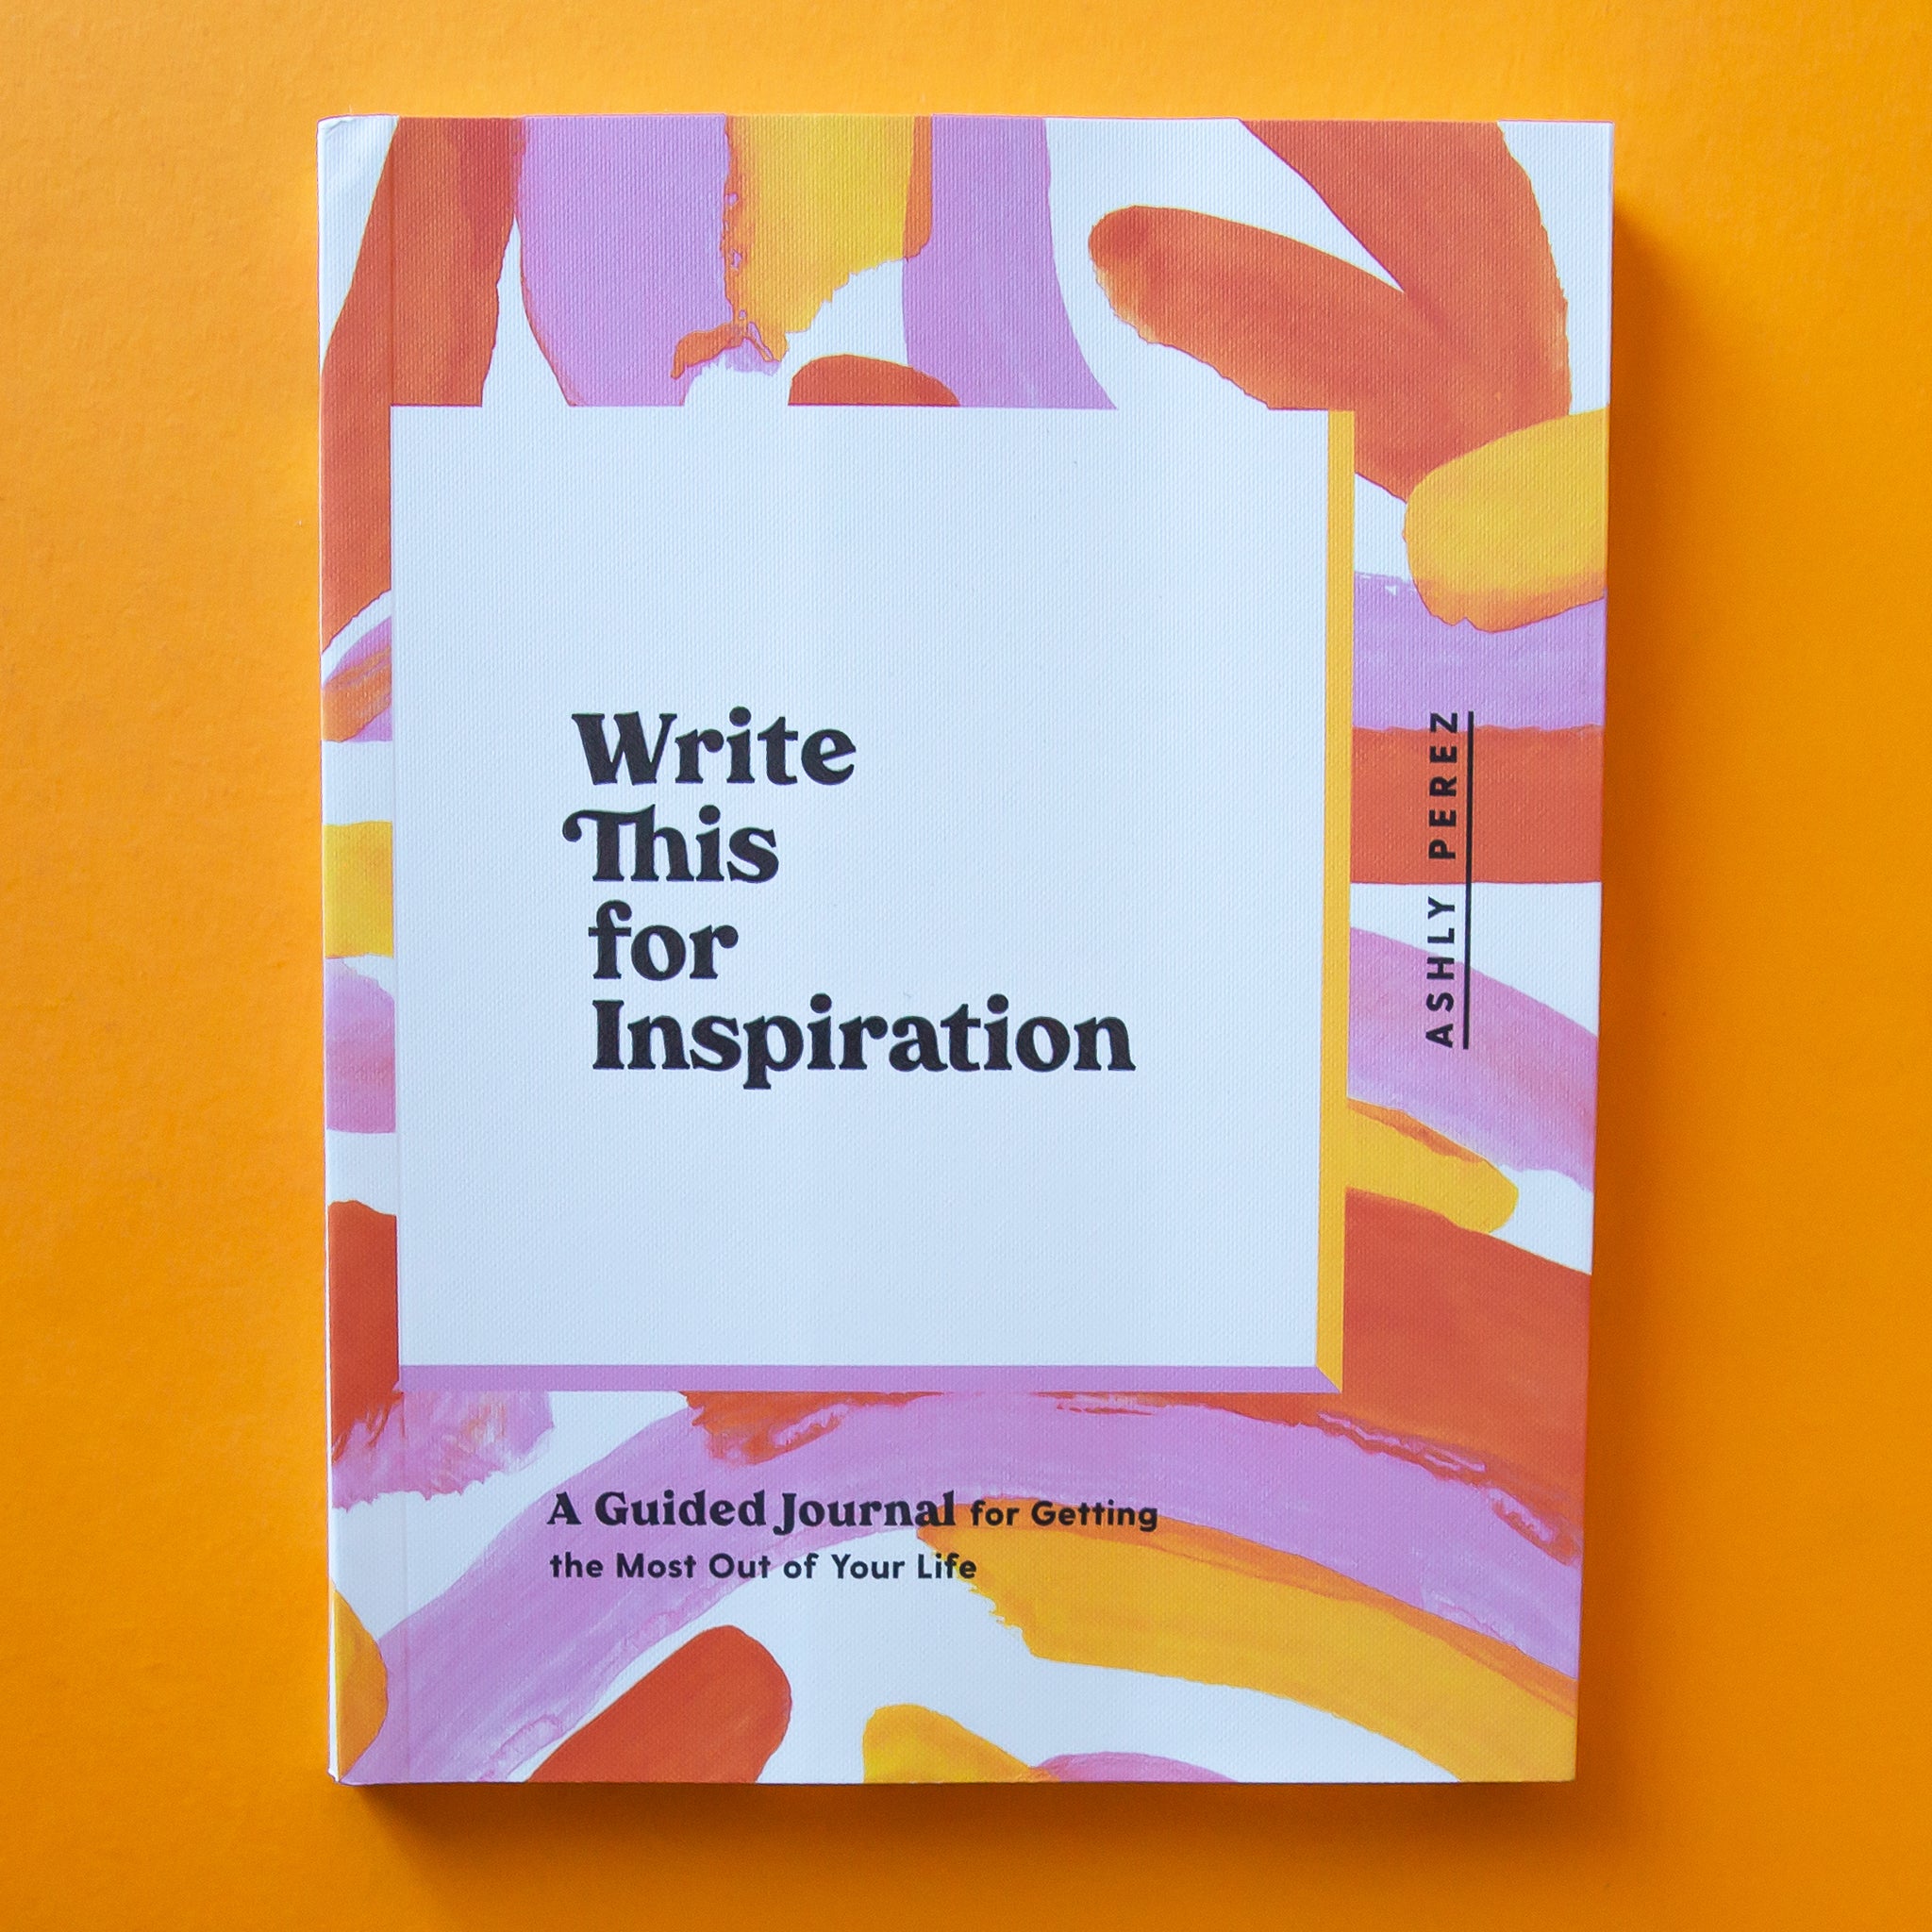 This journal is titled &#39;Write This for Inspiration by Ashly Perez&#39; in black lettering and has an enjoyable free-hand painted design with shades of pinks and oranges on top of a white background. The binding of the book is also white with the title spelt out in similar colorful lettering.